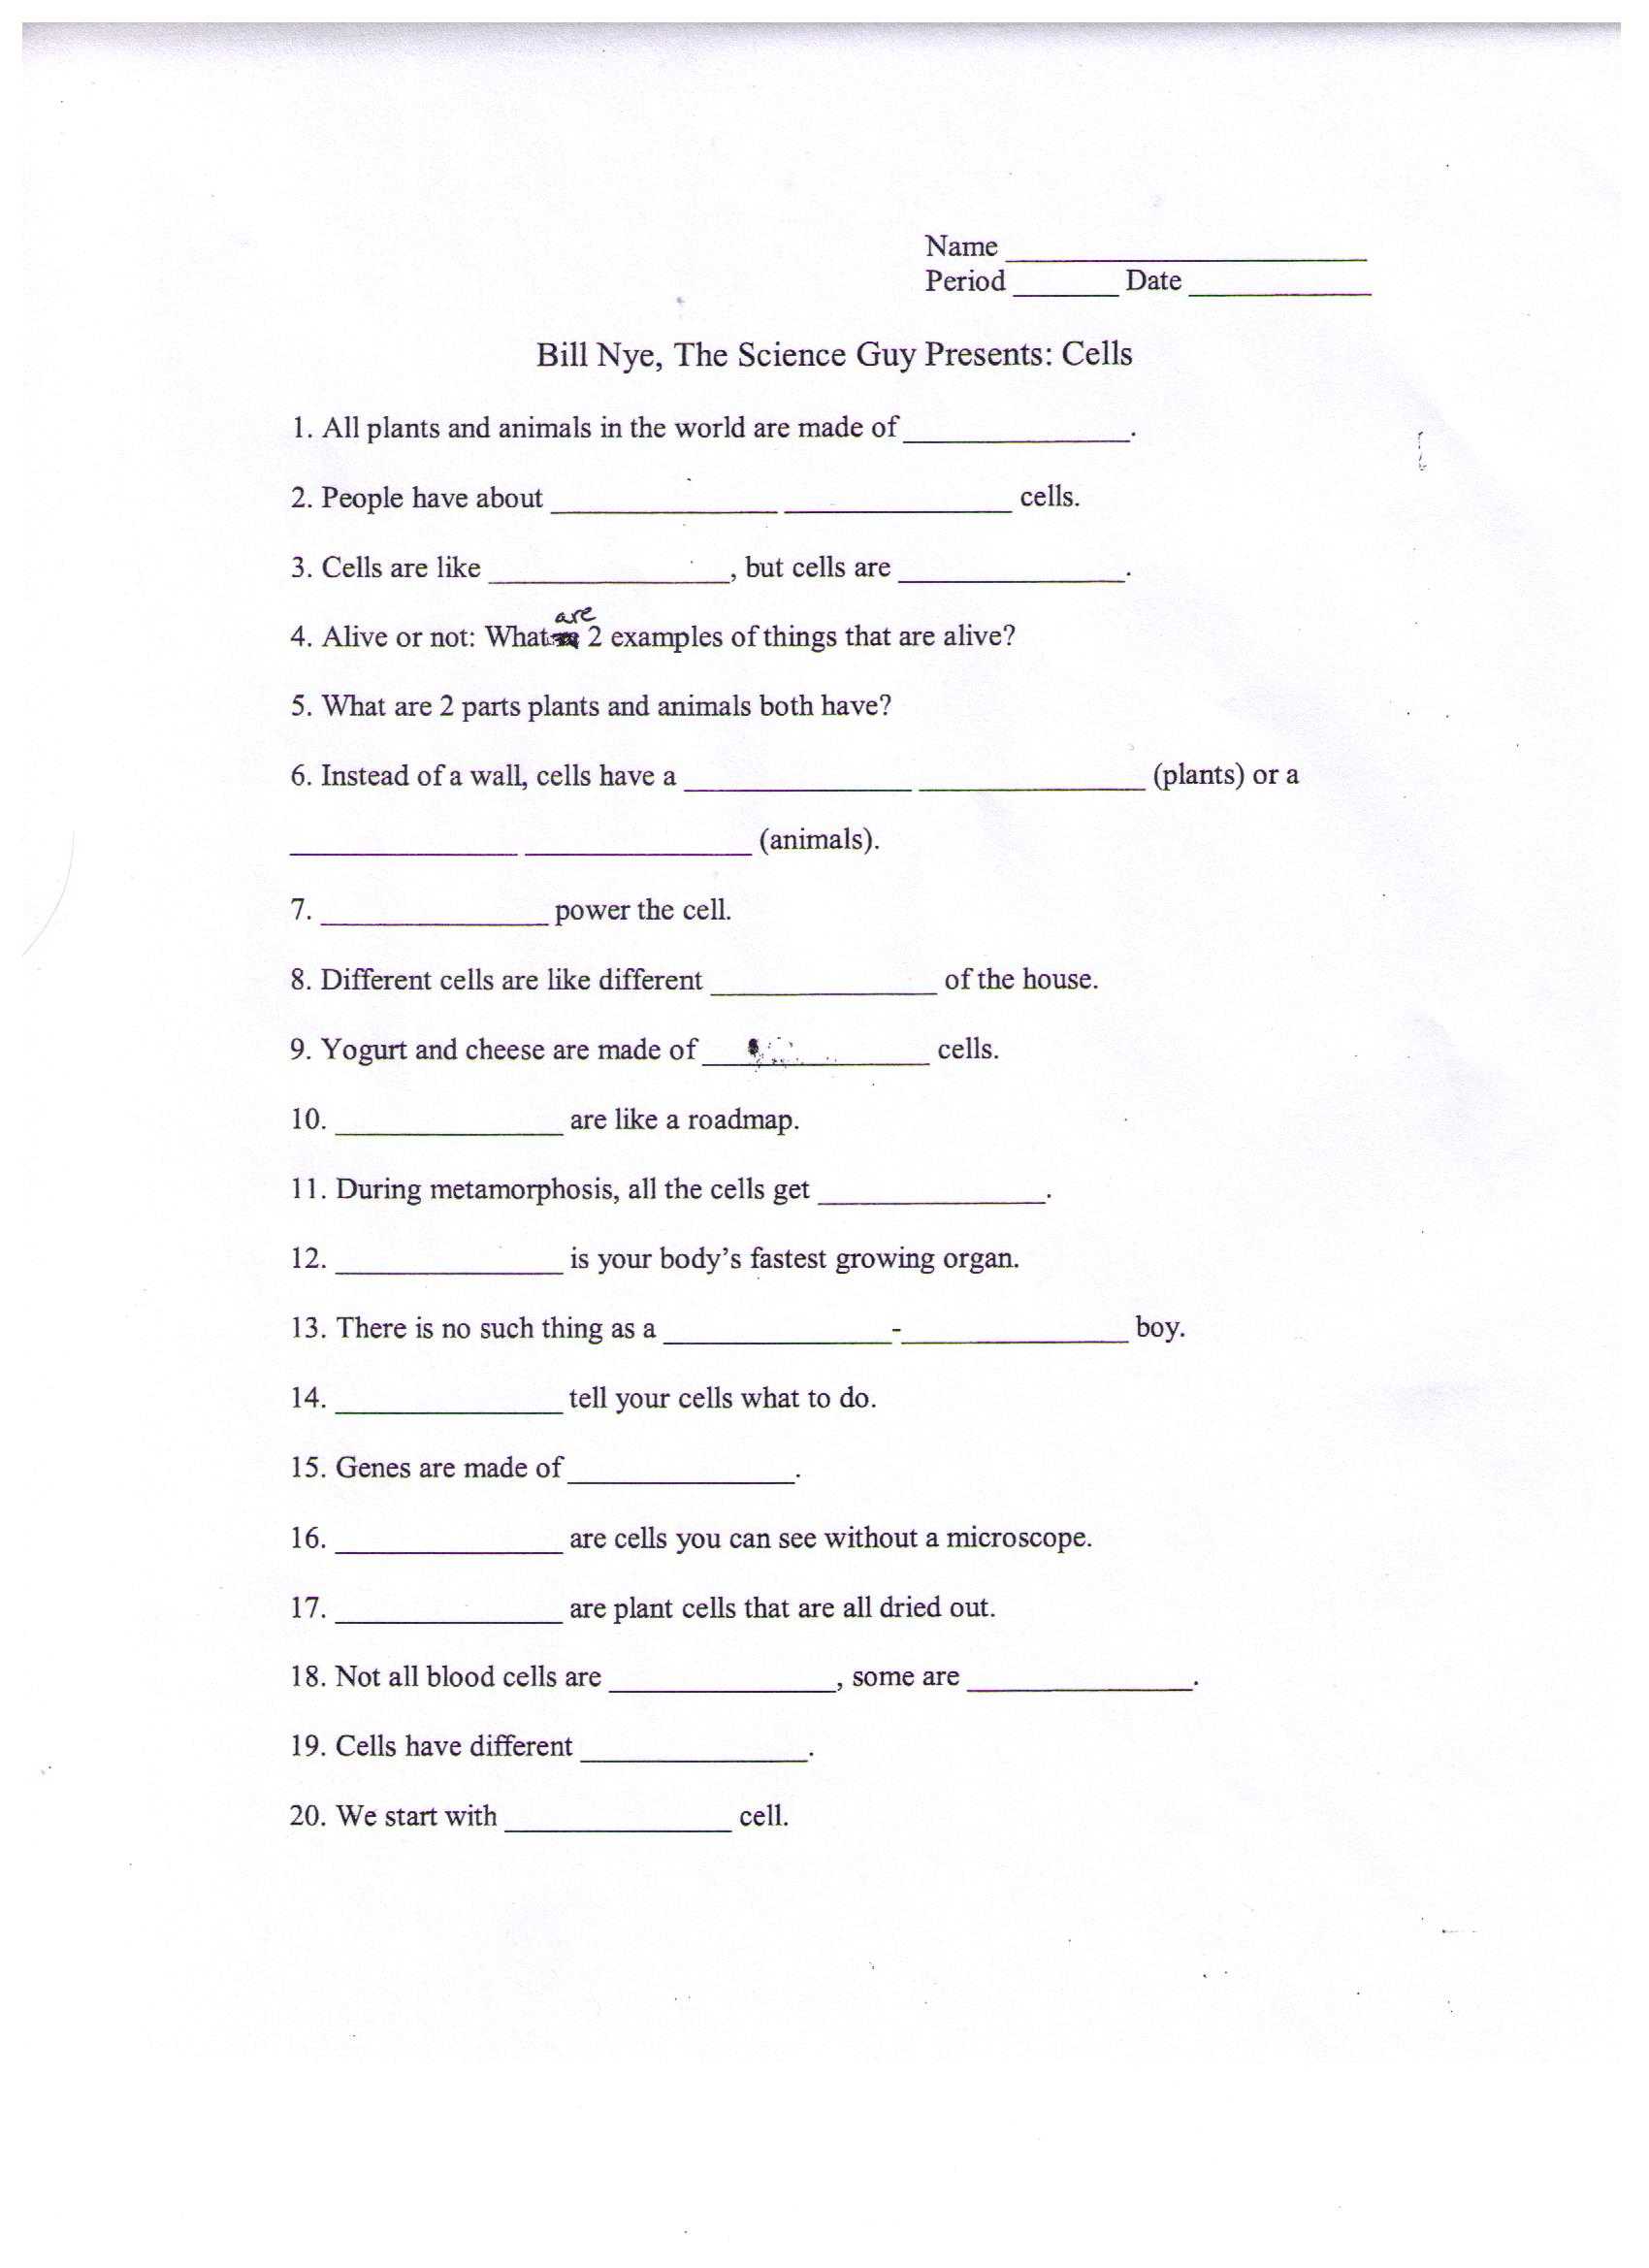 Wolves In Yellowstone Student Worksheet Answers as Well as Greatest Discoveries with Bill Nye Physics Worksheet Answers Gallery